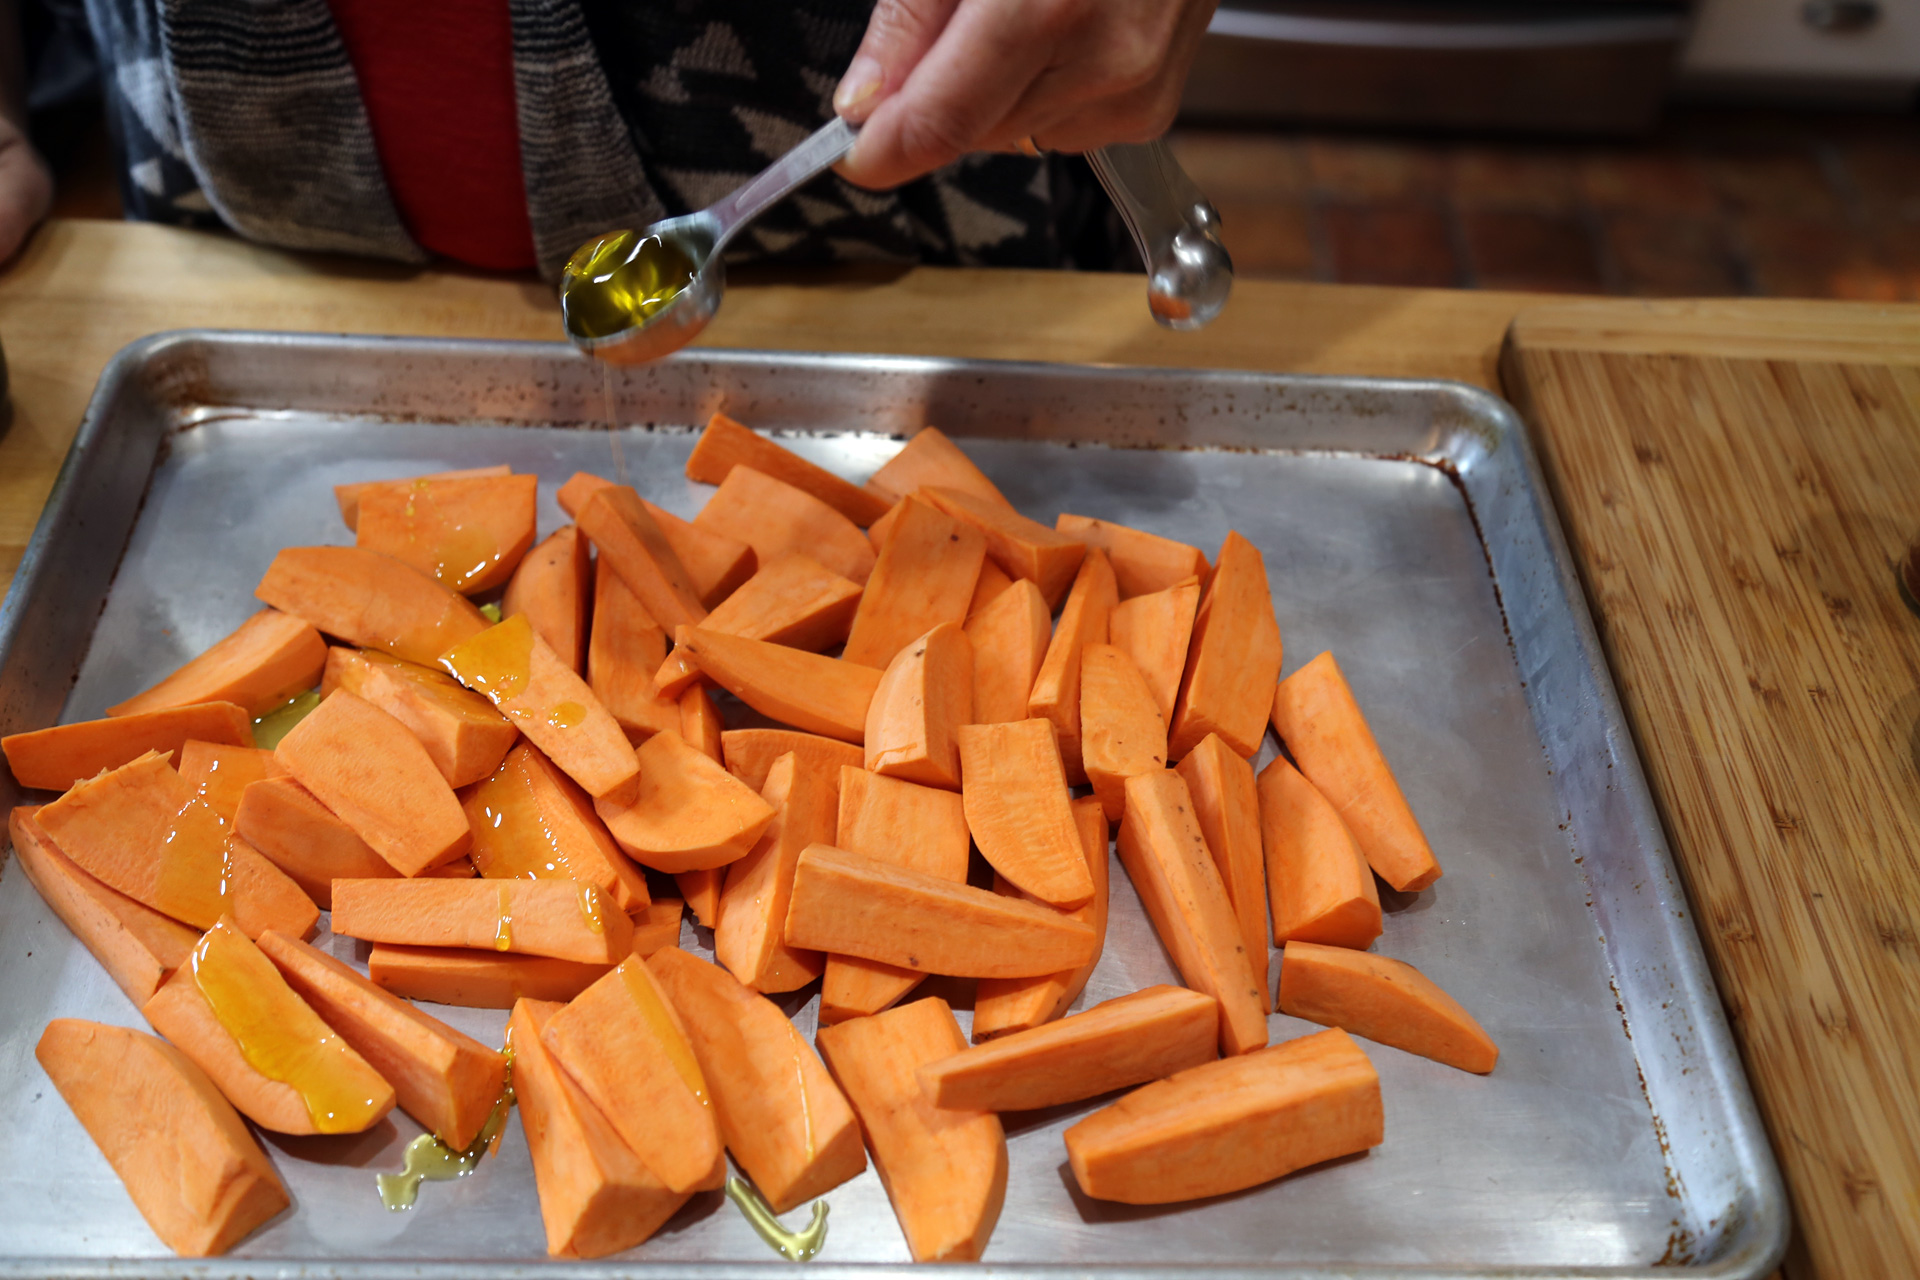 Add the yams to a large rimmed baking sheet and drizzle with the olive oil.